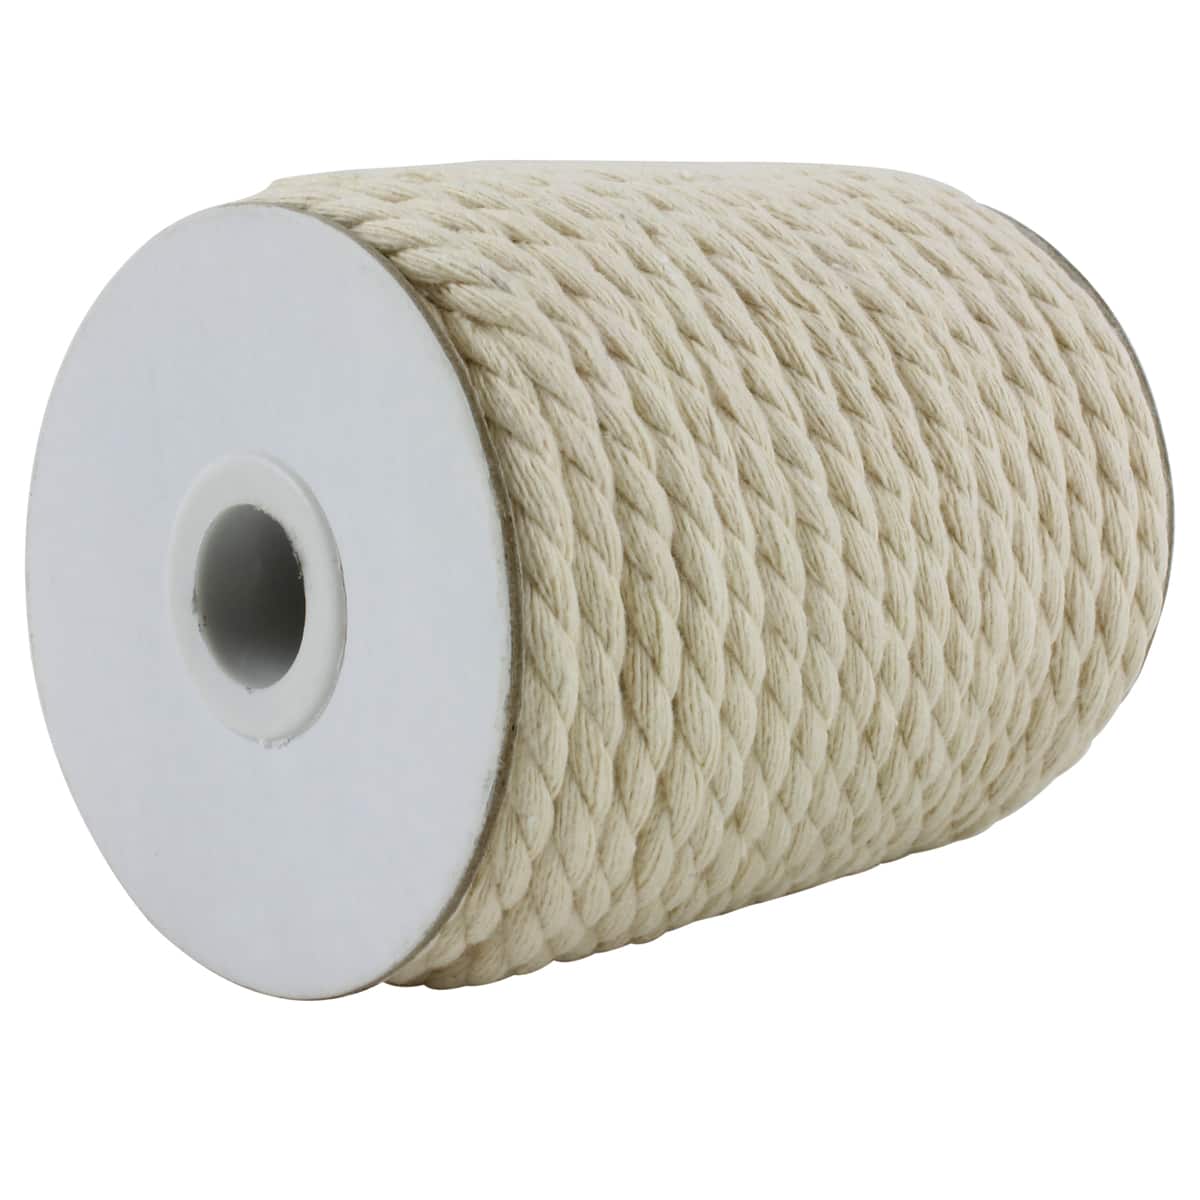 100% Natural Cotton Rope (1 in x 100 ft) Thick White Rope for Crafts,  Railings, Hammock, Nautical, Landscaping